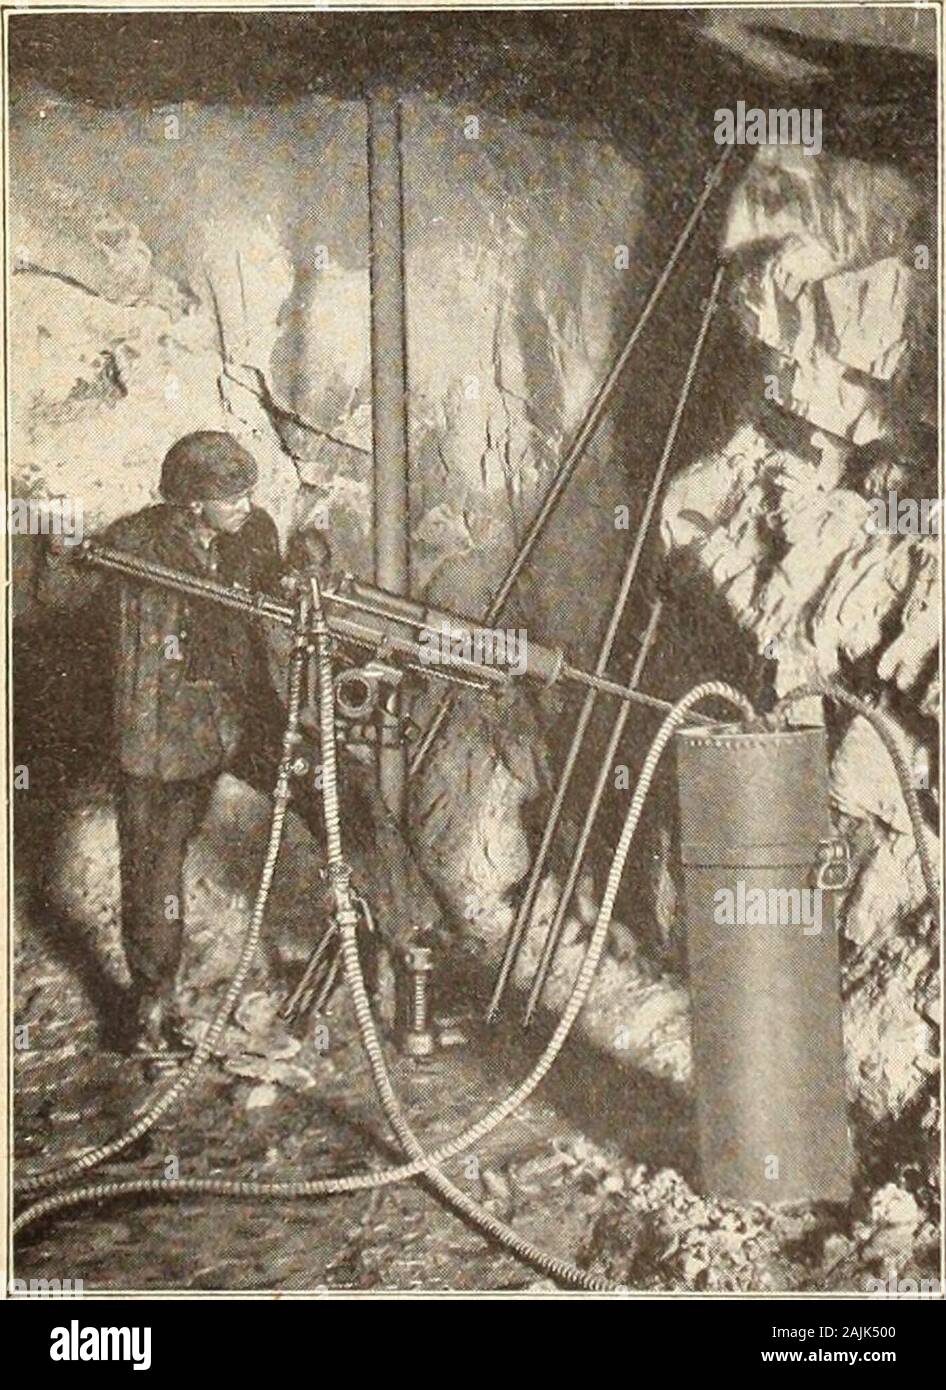 Canadian mining journal July-December 1915 . S: Western Union, A. B. C. (4th and Sth Editions), A.]., Liebers and Priratt. Sullivan Water-Jet Drills Will get the hole in and the cuttings out quickest FOR DRIFTING, tunneling and other holes at or nearthe horizontal, you can increase vour drilling speed 25 to 100per cent by employing SULLIVAN WATER -JETDRILLS. These machines are fitted with hollow pistons, and usehollow steel. Water and compressed air are forced throughthe piston and steel to the bottom of the hole, throwing outthe cuttings, preventing sticking of bits, and affording a cleandril Stock Photo